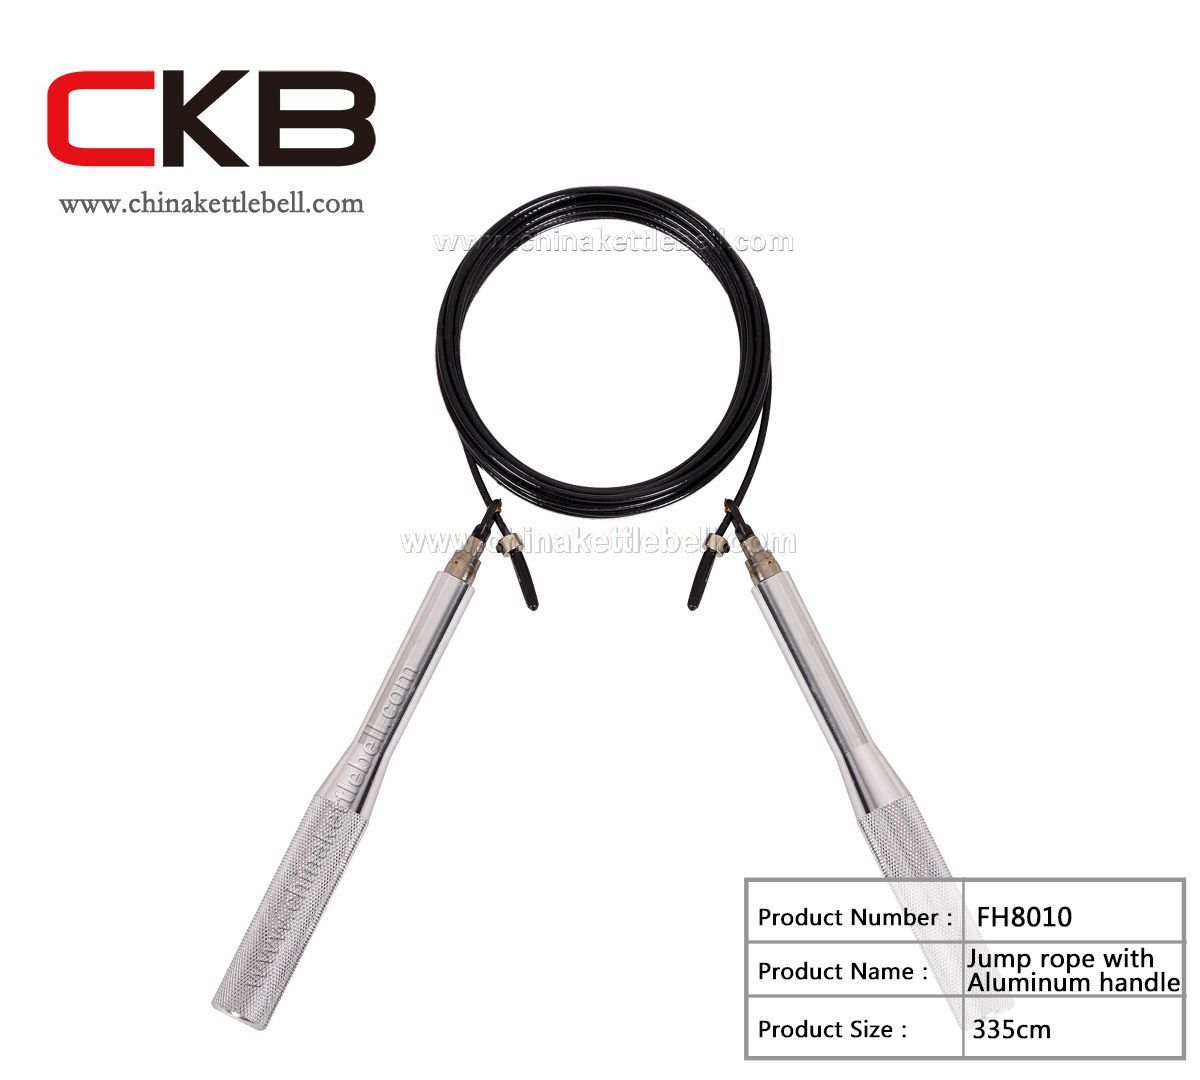 Jump rope with Aluminum handle